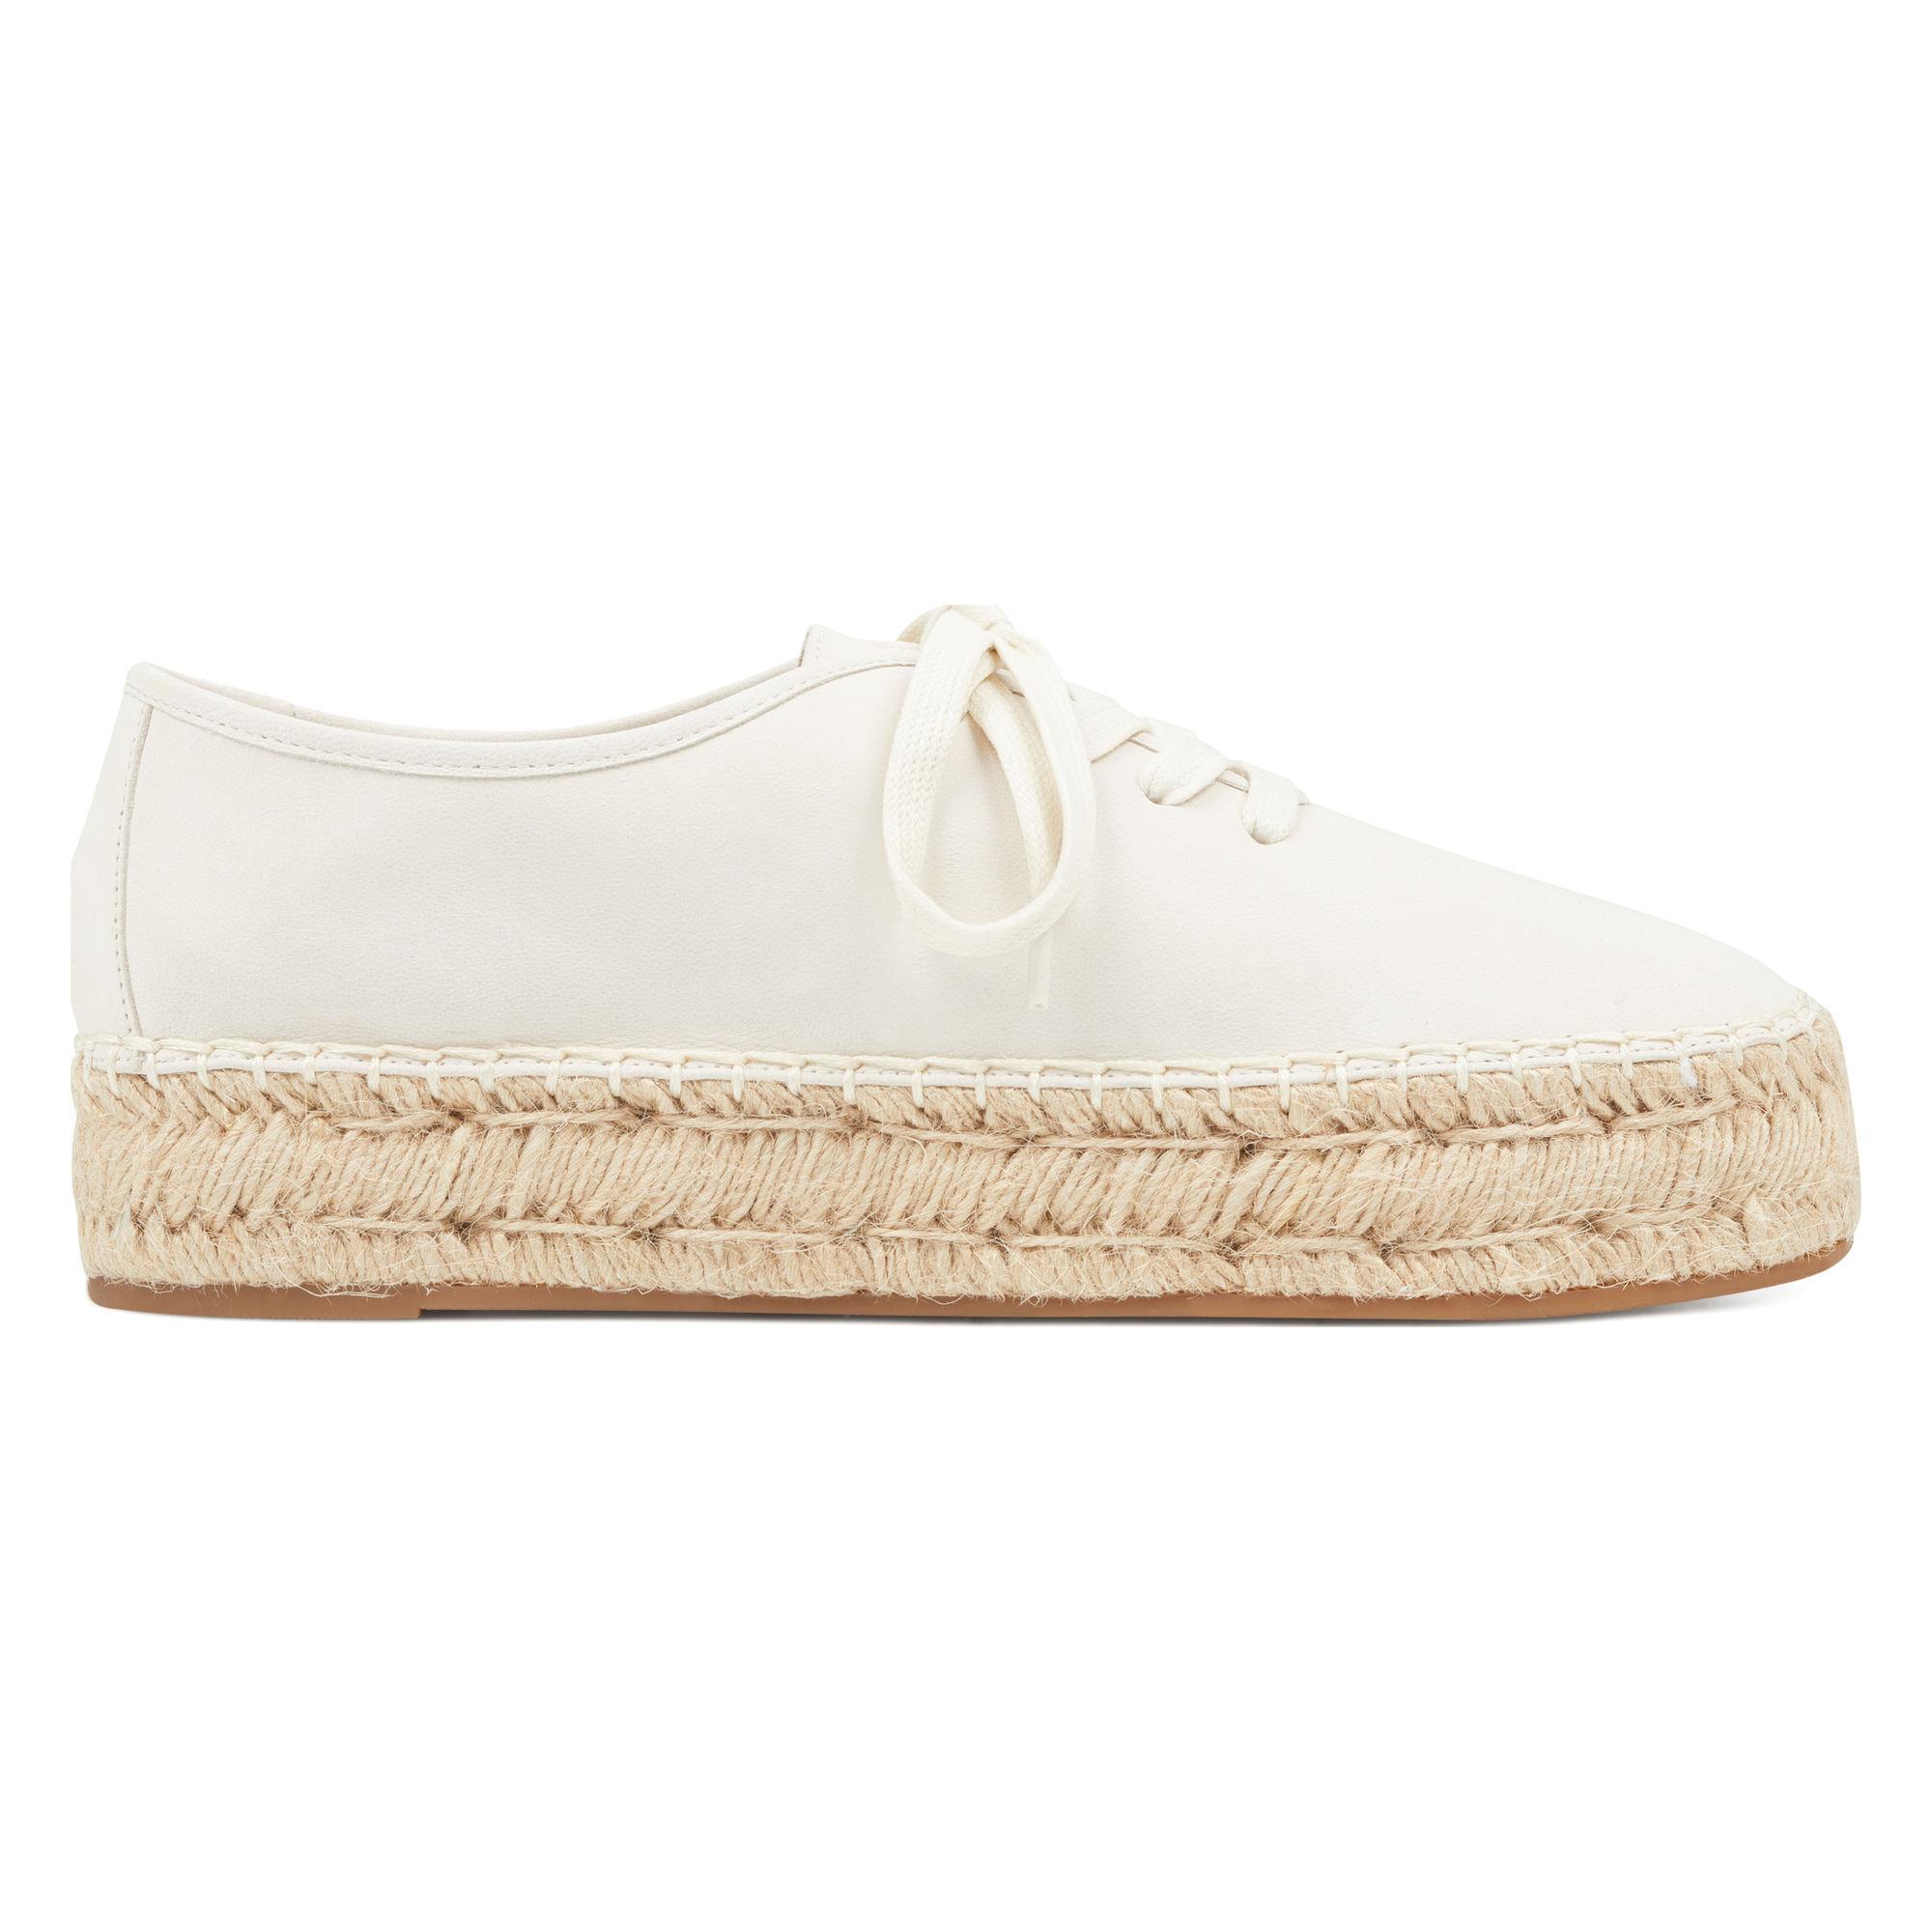 Nine West Leather Gingerbred Espadrille Sneakers in White - Lyst